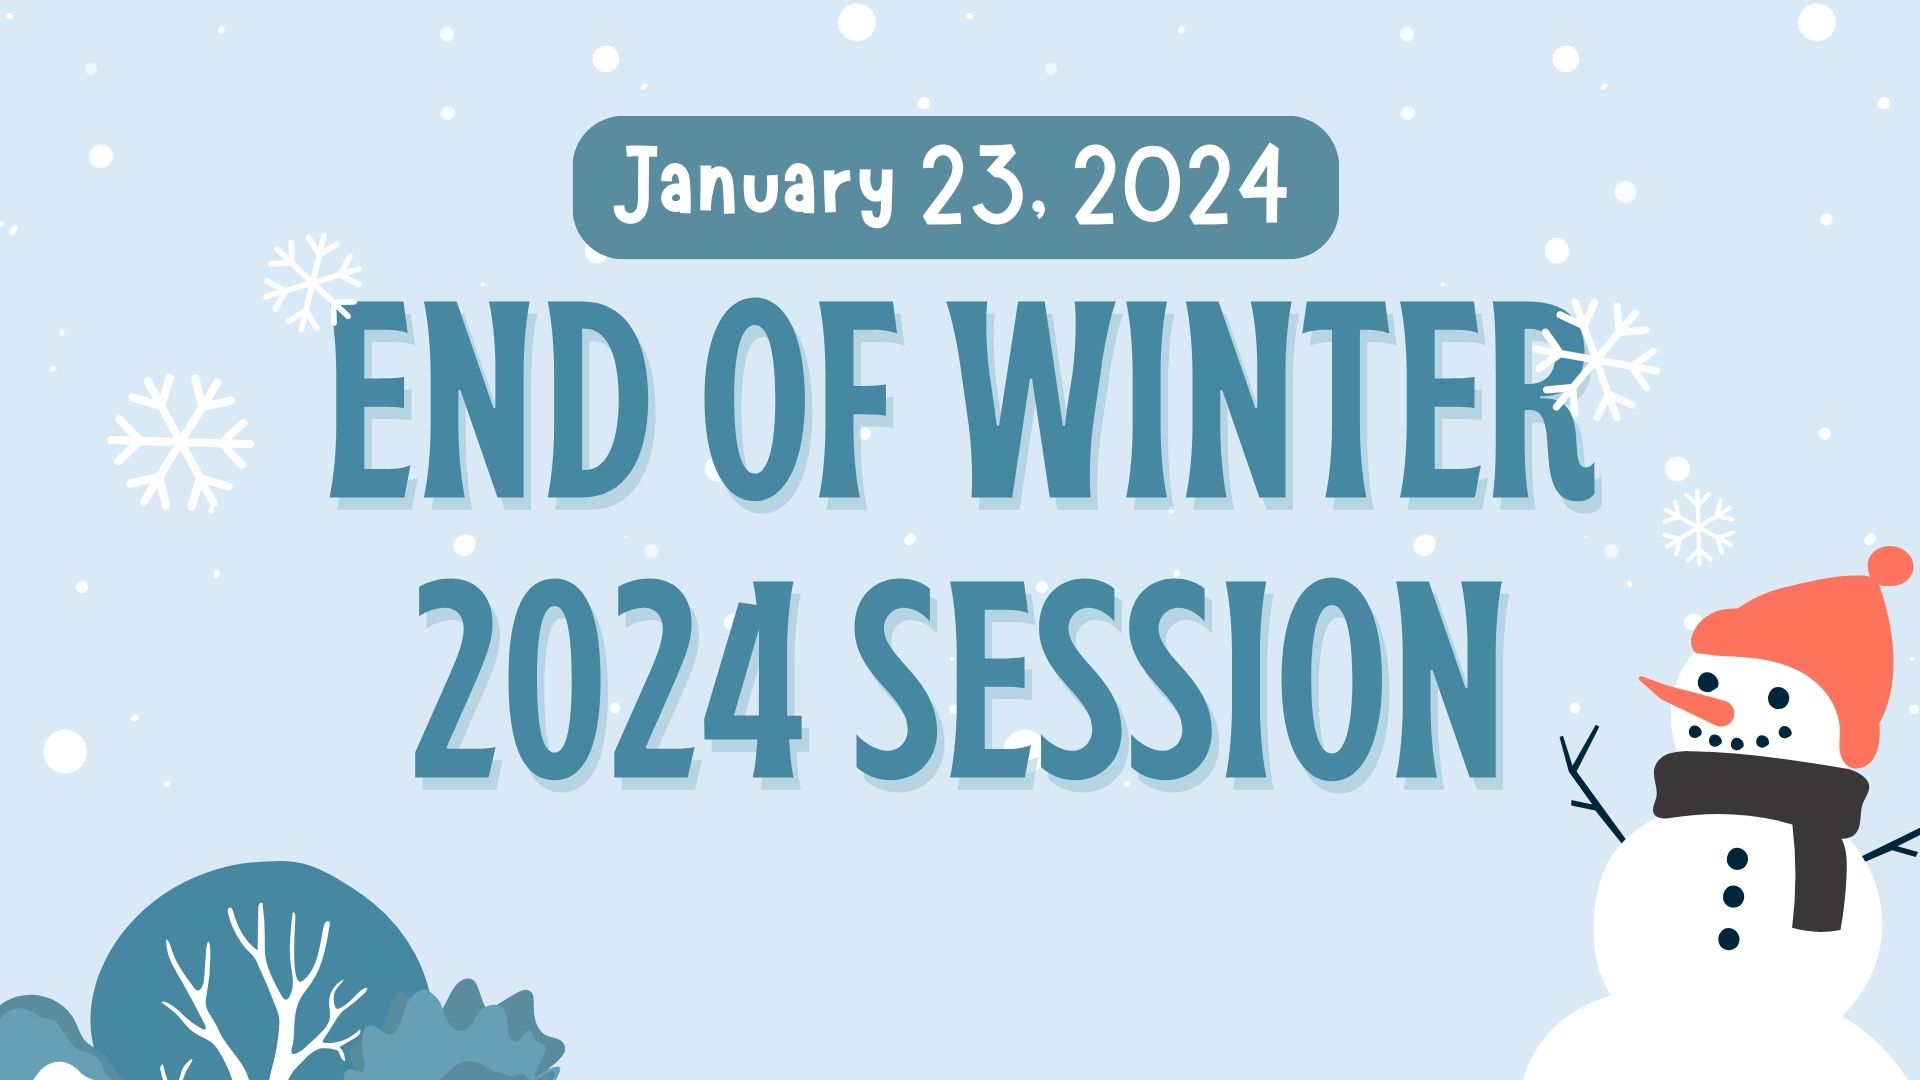 End of Winter 2024 Session